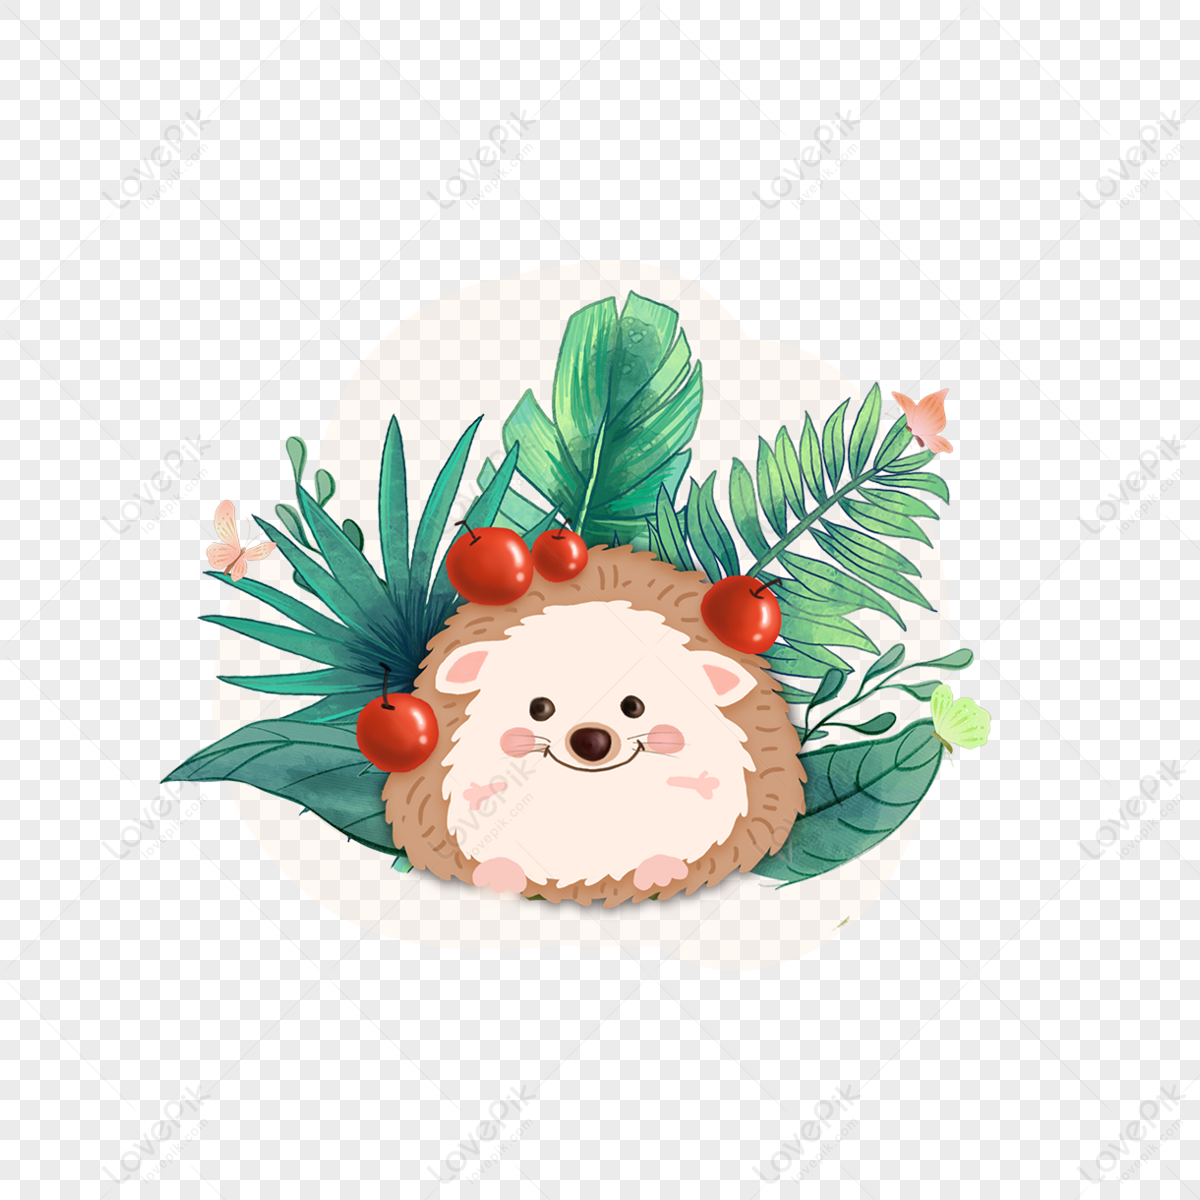 Summer plant hedgehog animal clipart,small animals,tropical,animals and plants png hd transparent image